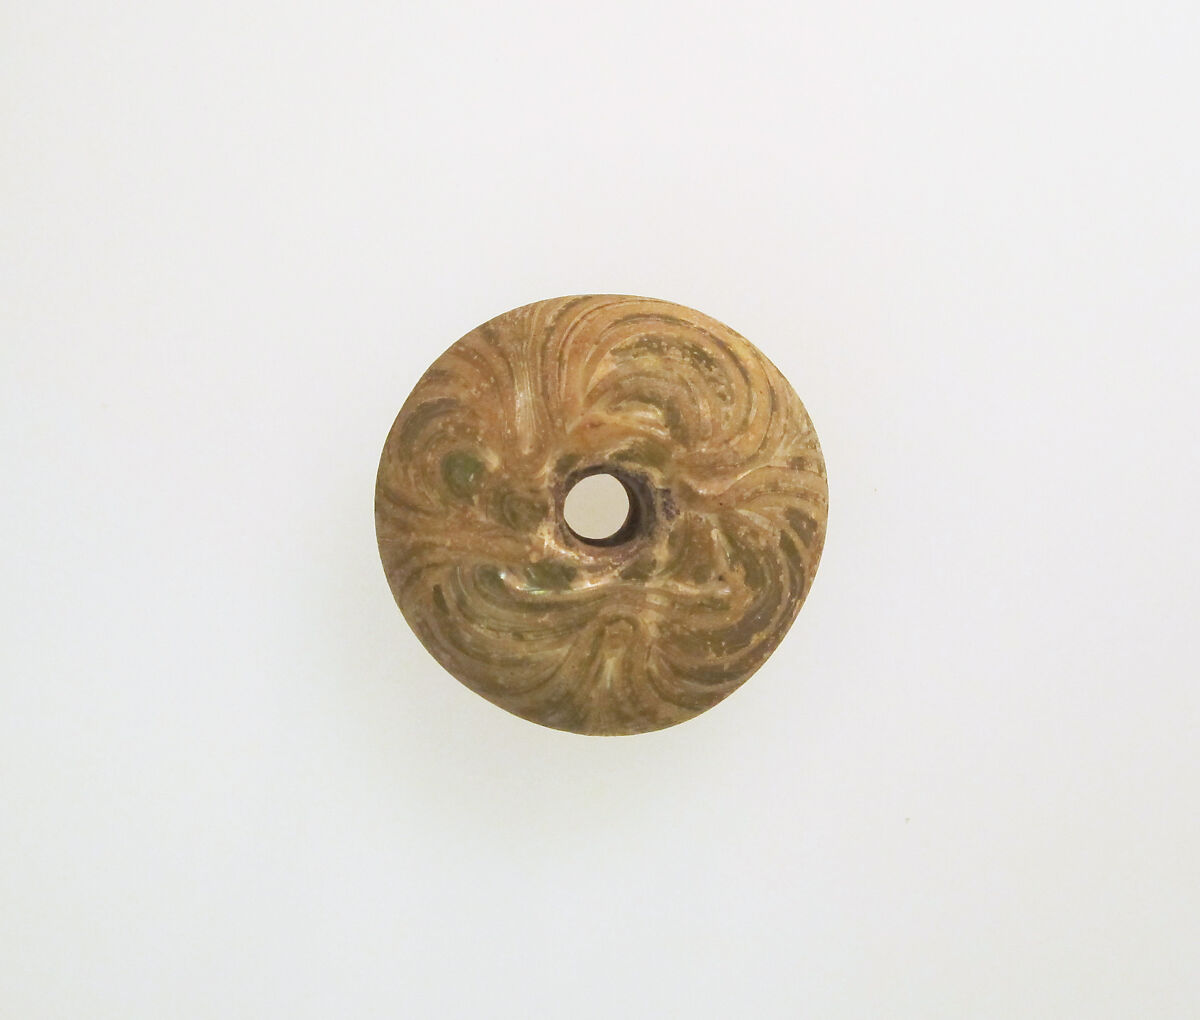 Glass spindle whorl, Glass, Possibly Merovingian 